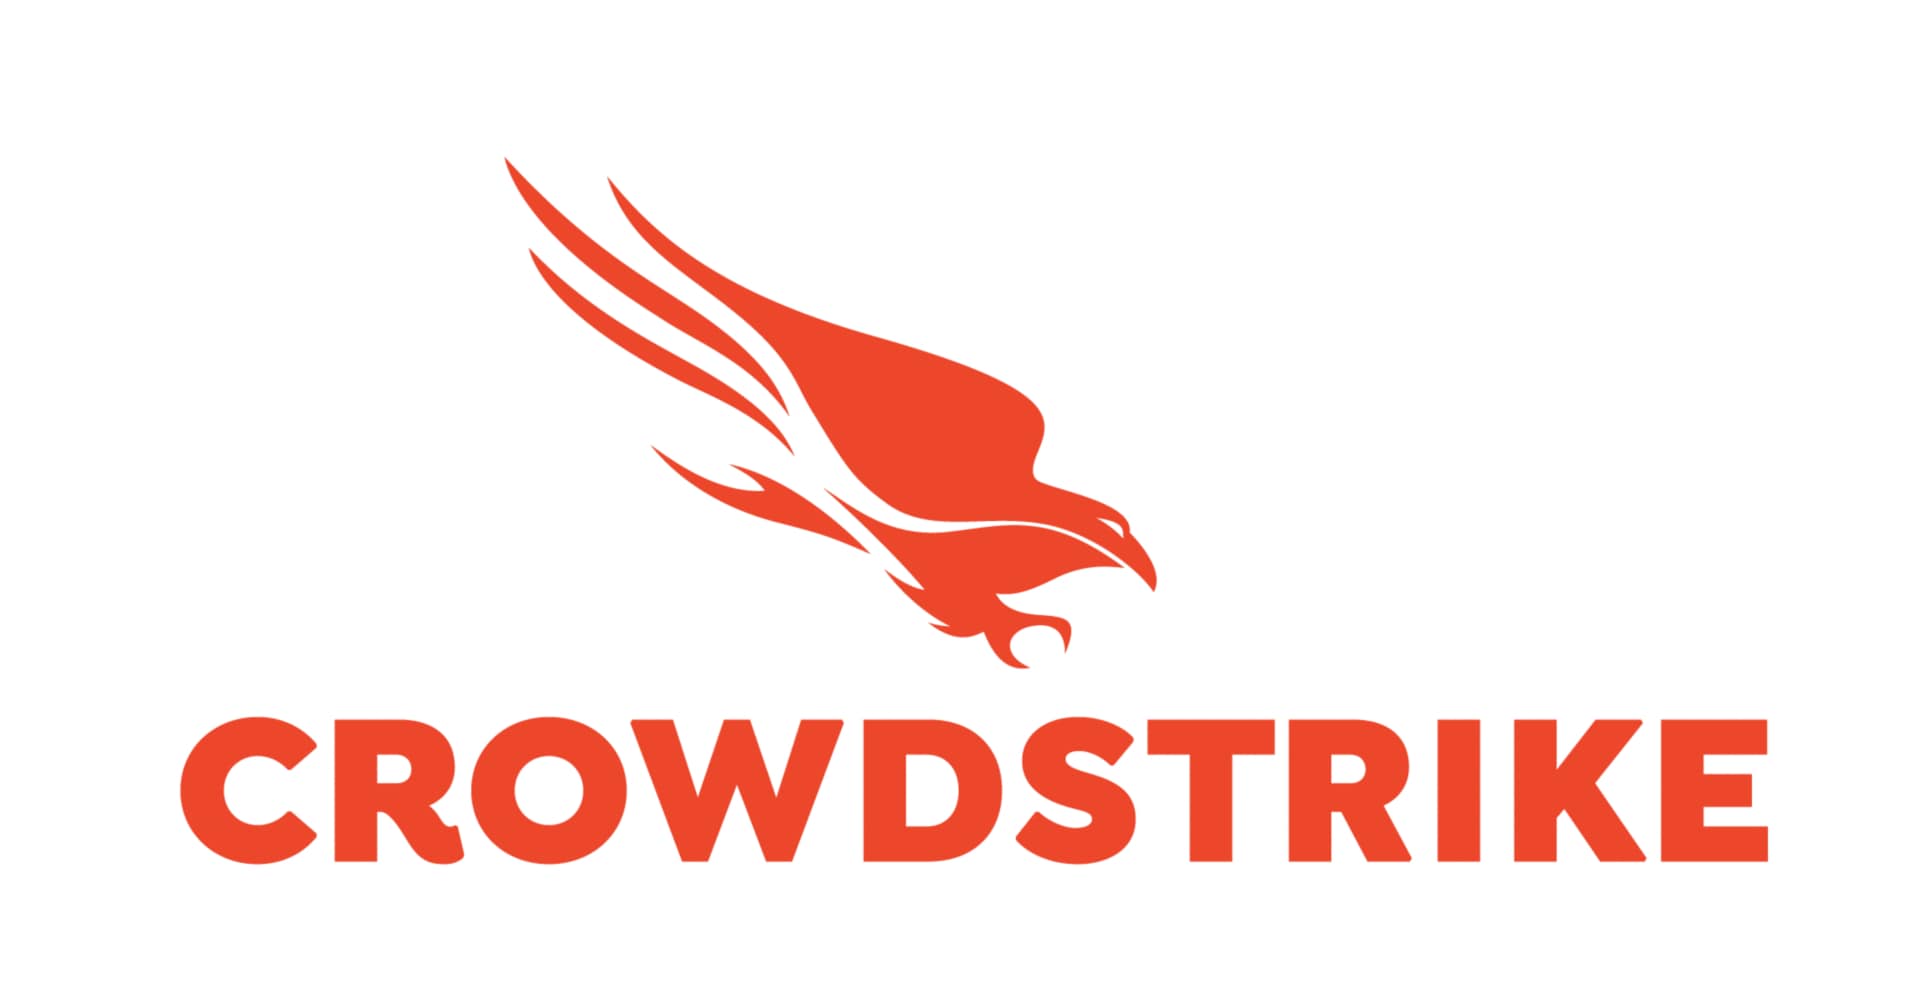 CrowdStrike Falcon Forensics with Console Software Subscription